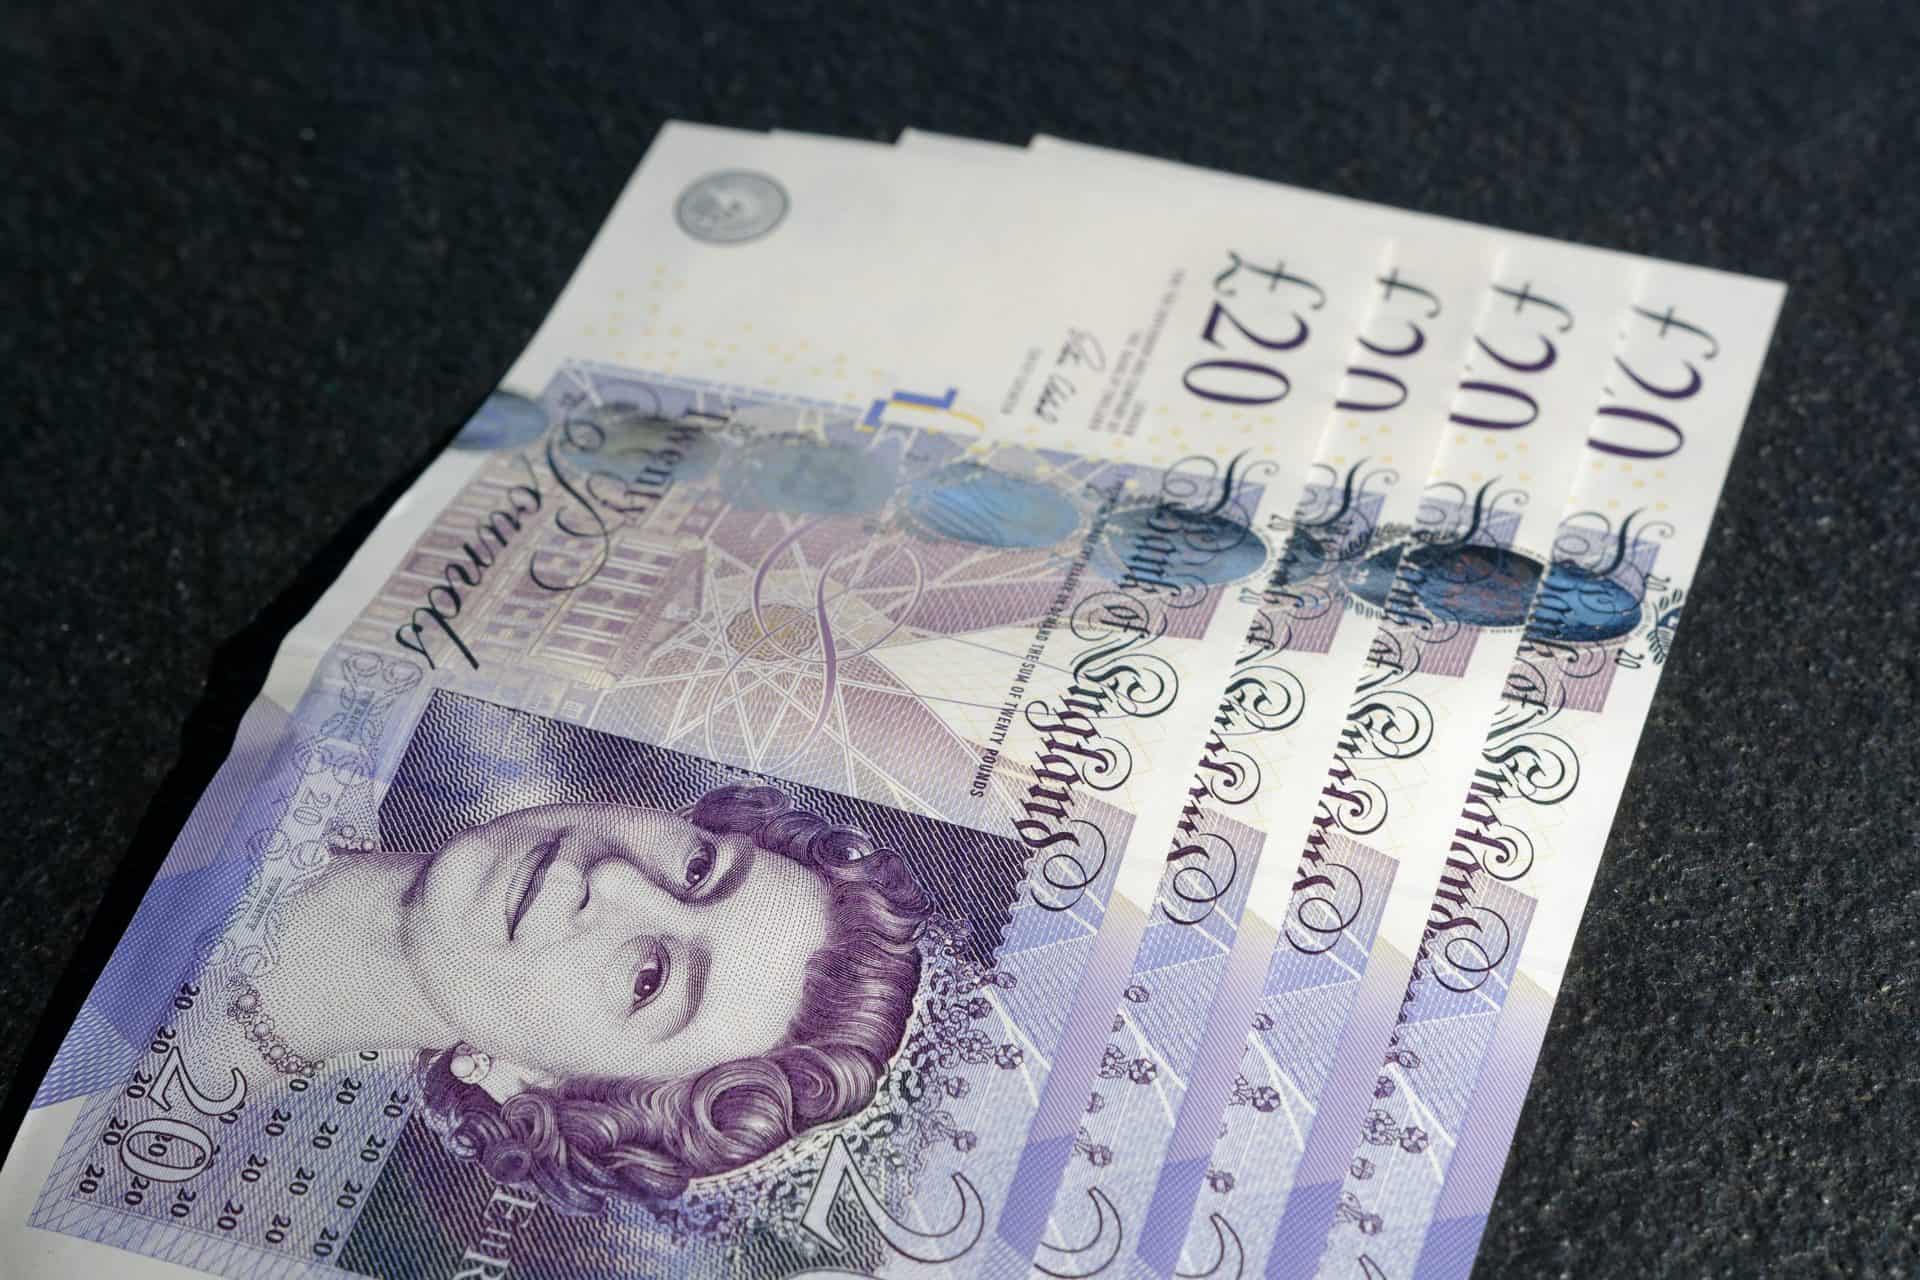 Pocket money falls below £5 a week for first time in 20 years